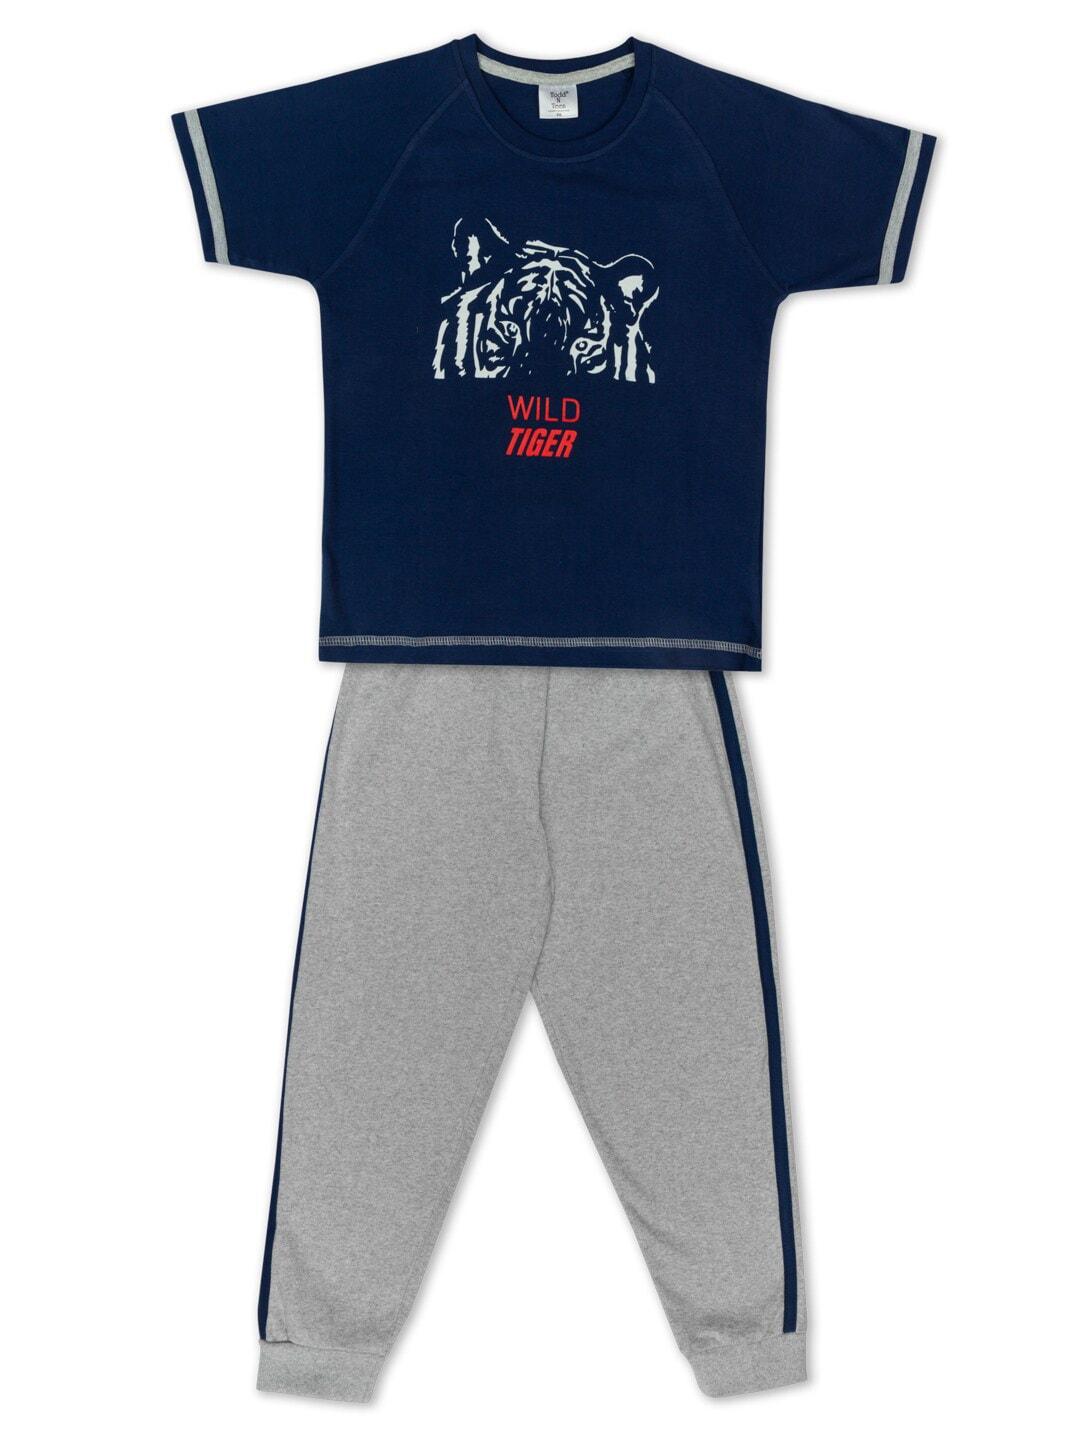 Todd N Teen Boys Navy Blue & Grey Printed T-shirt with Joggers